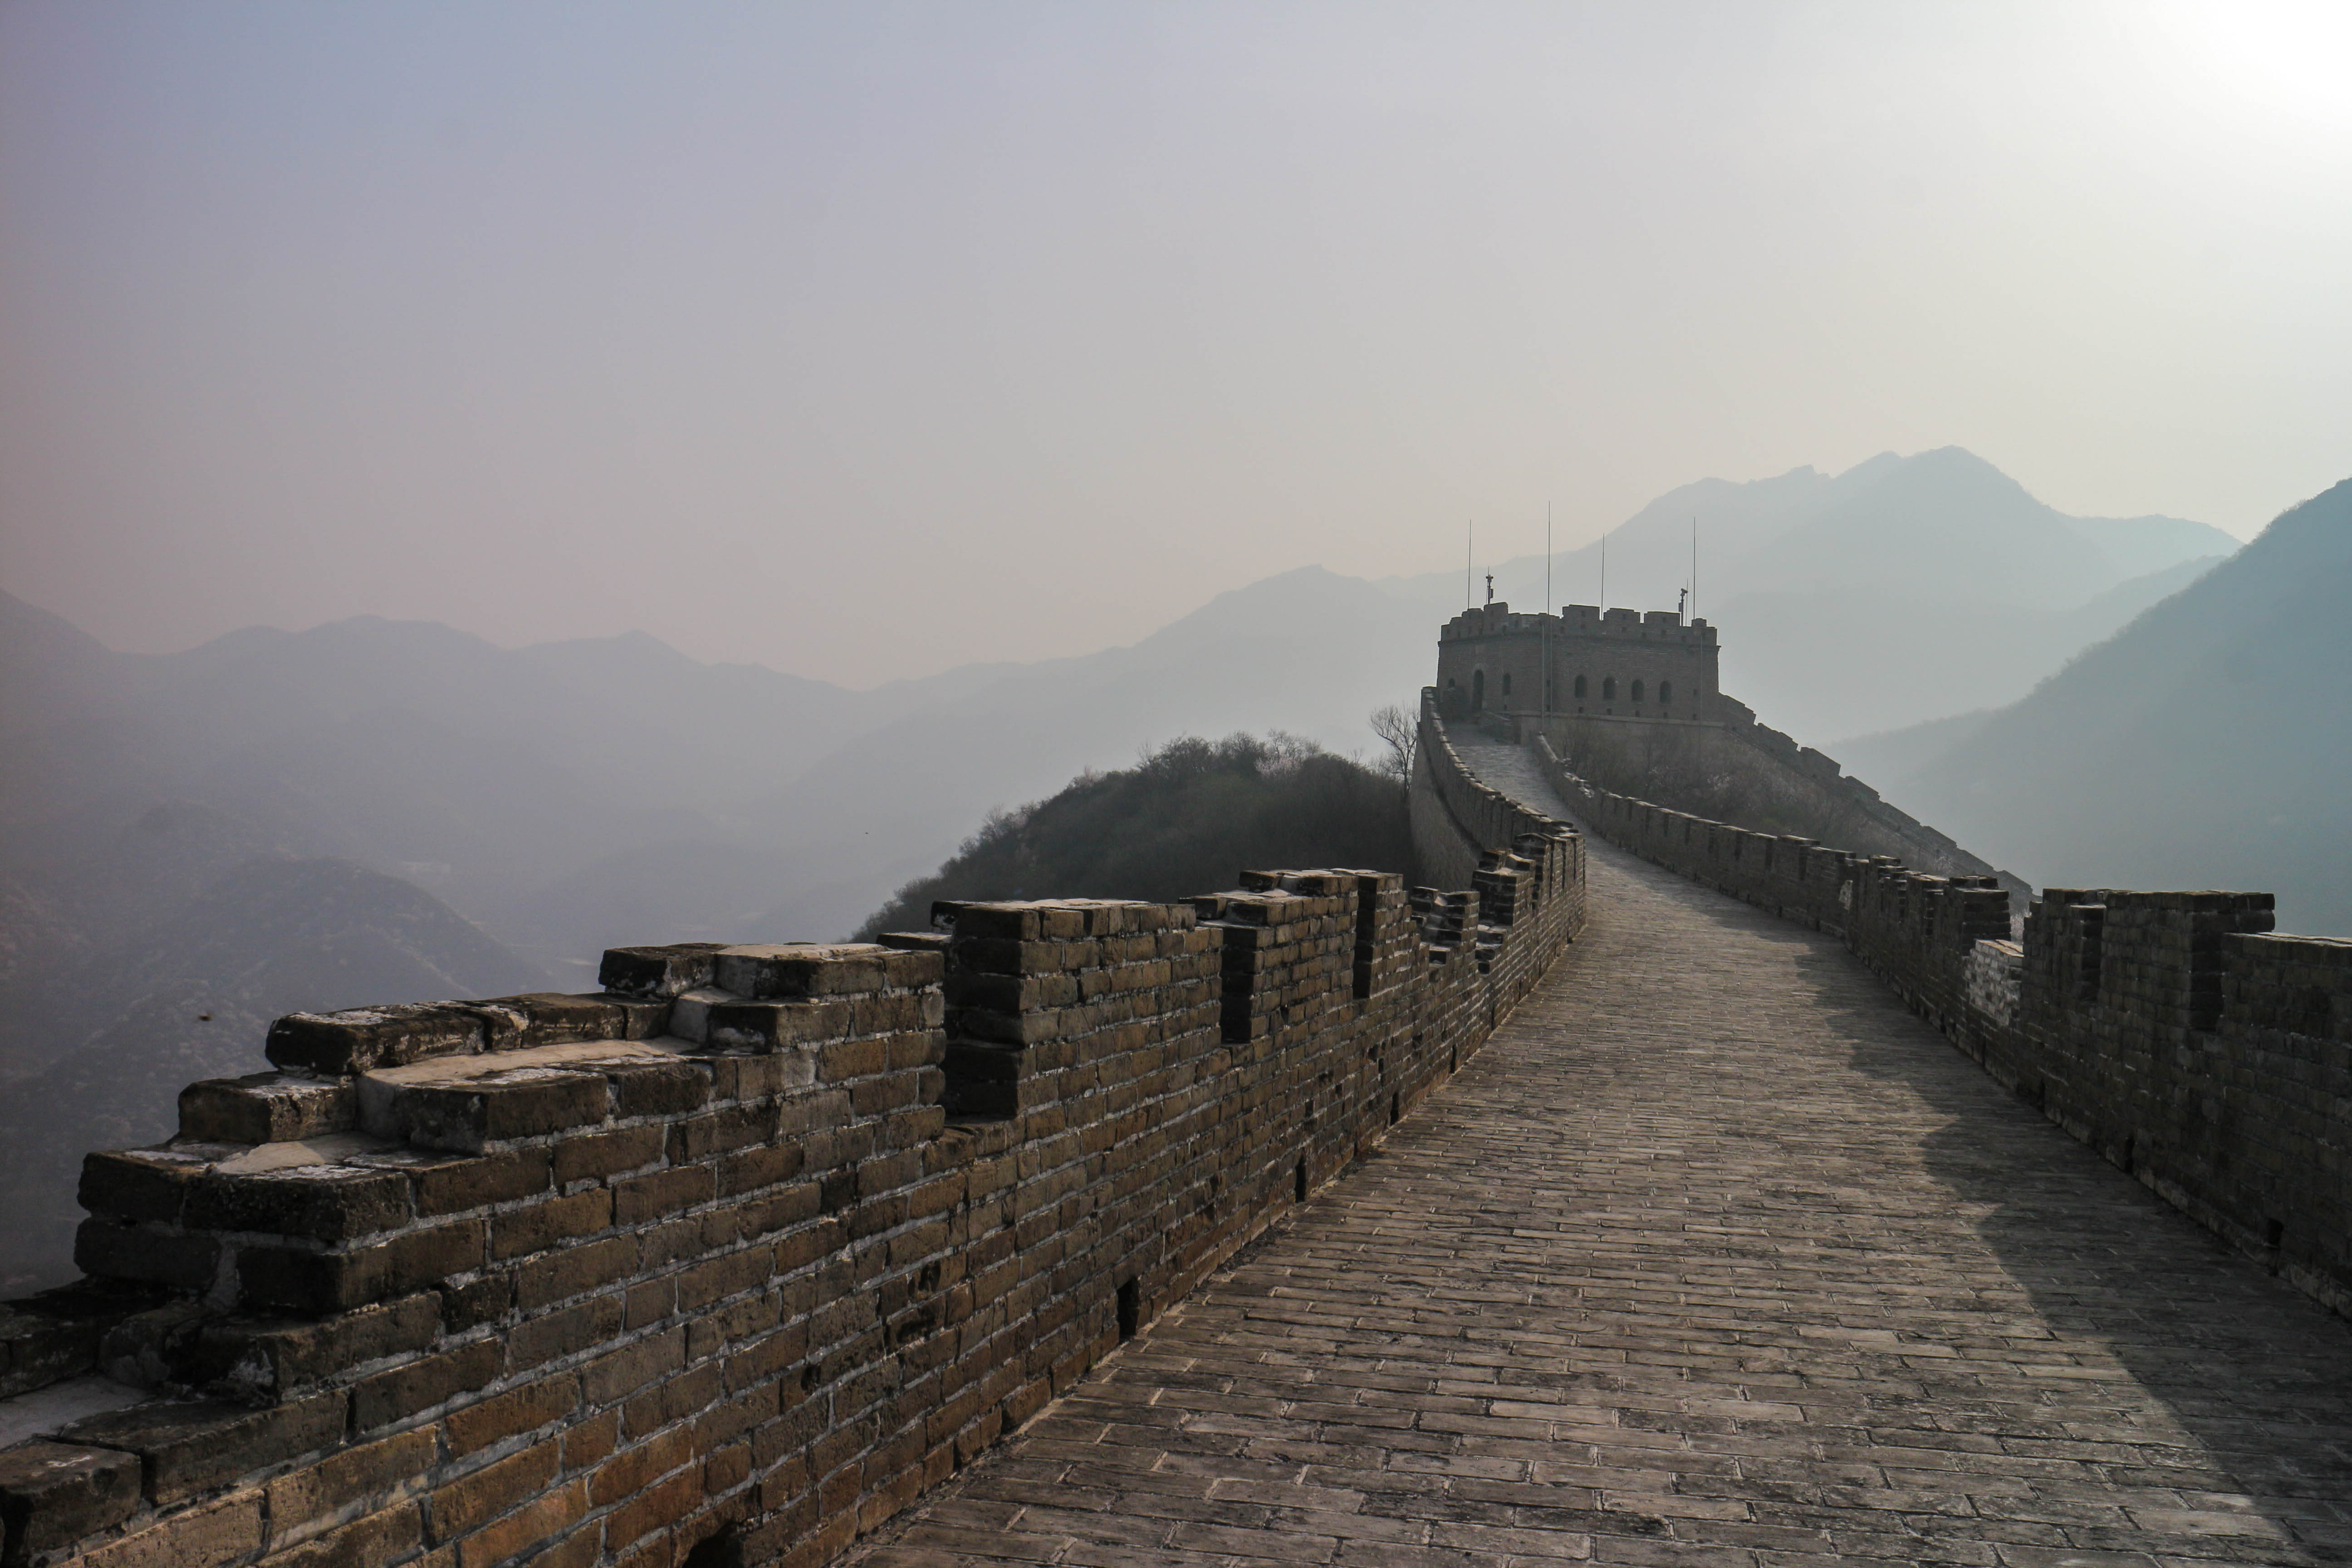 The Great Wall of China empty